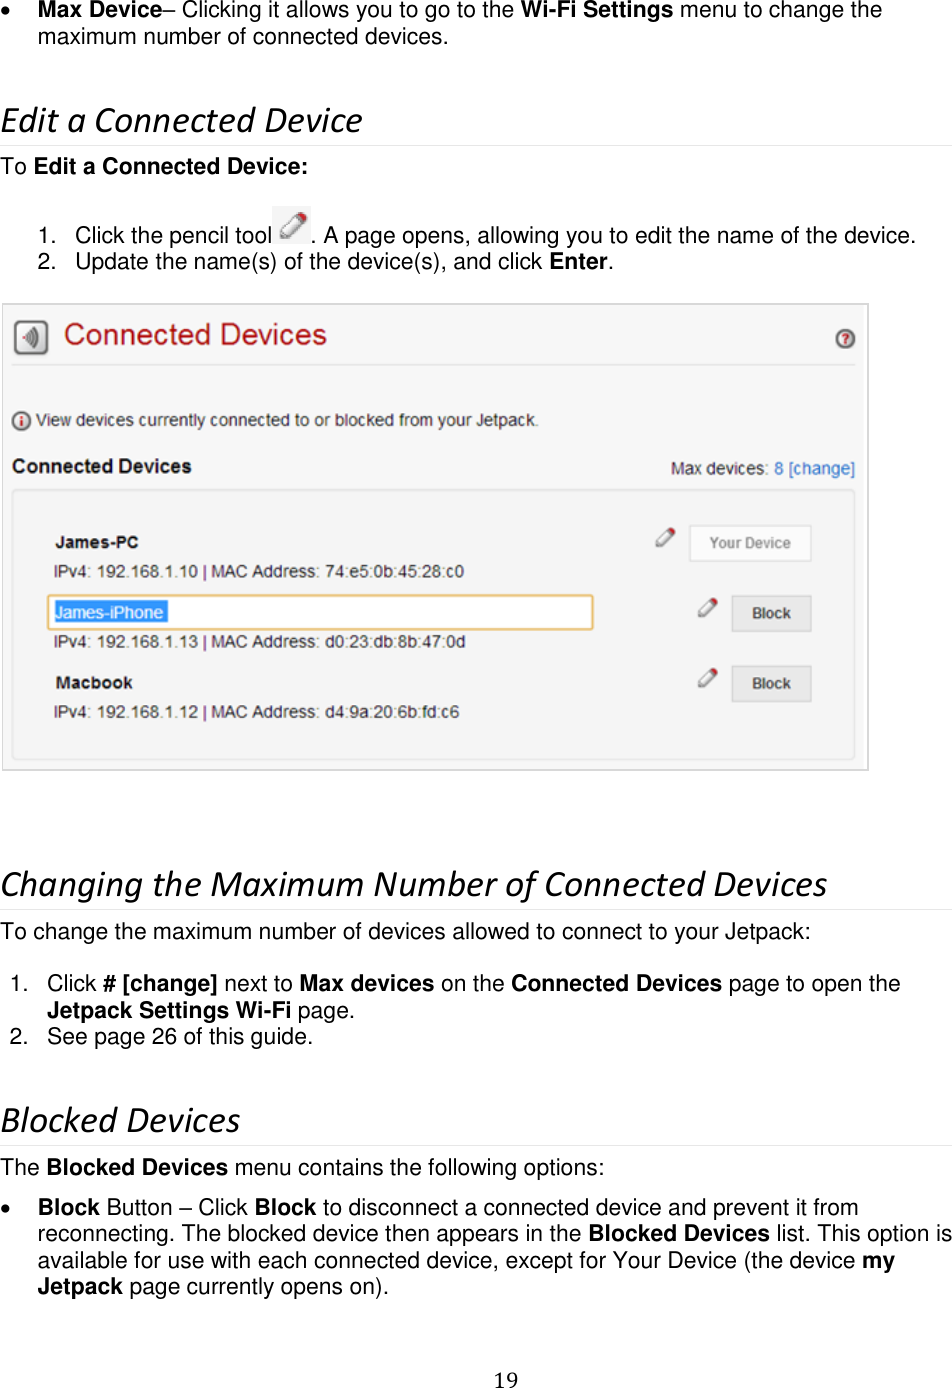   19   Max Device– Clicking it allows you to go to the Wi-Fi Settings menu to change the maximum number of connected devices.  Edit a Connected Device To Edit a Connected Device:   1.  Click the pencil tool . A page opens, allowing you to edit the name of the device. 2.  Update the name(s) of the device(s), and click Enter.    Changing the Maximum Number of Connected Devices To change the maximum number of devices allowed to connect to your Jetpack:  1.  Click # [change] next to Max devices on the Connected Devices page to open the Jetpack Settings Wi-Fi page. 2.  See page 26 of this guide.  Blocked Devices The Blocked Devices menu contains the following options:  Block Button – Click Block to disconnect a connected device and prevent it from reconnecting. The blocked device then appears in the Blocked Devices list. This option is available for use with each connected device, except for Your Device (the device my Jetpack page currently opens on). 